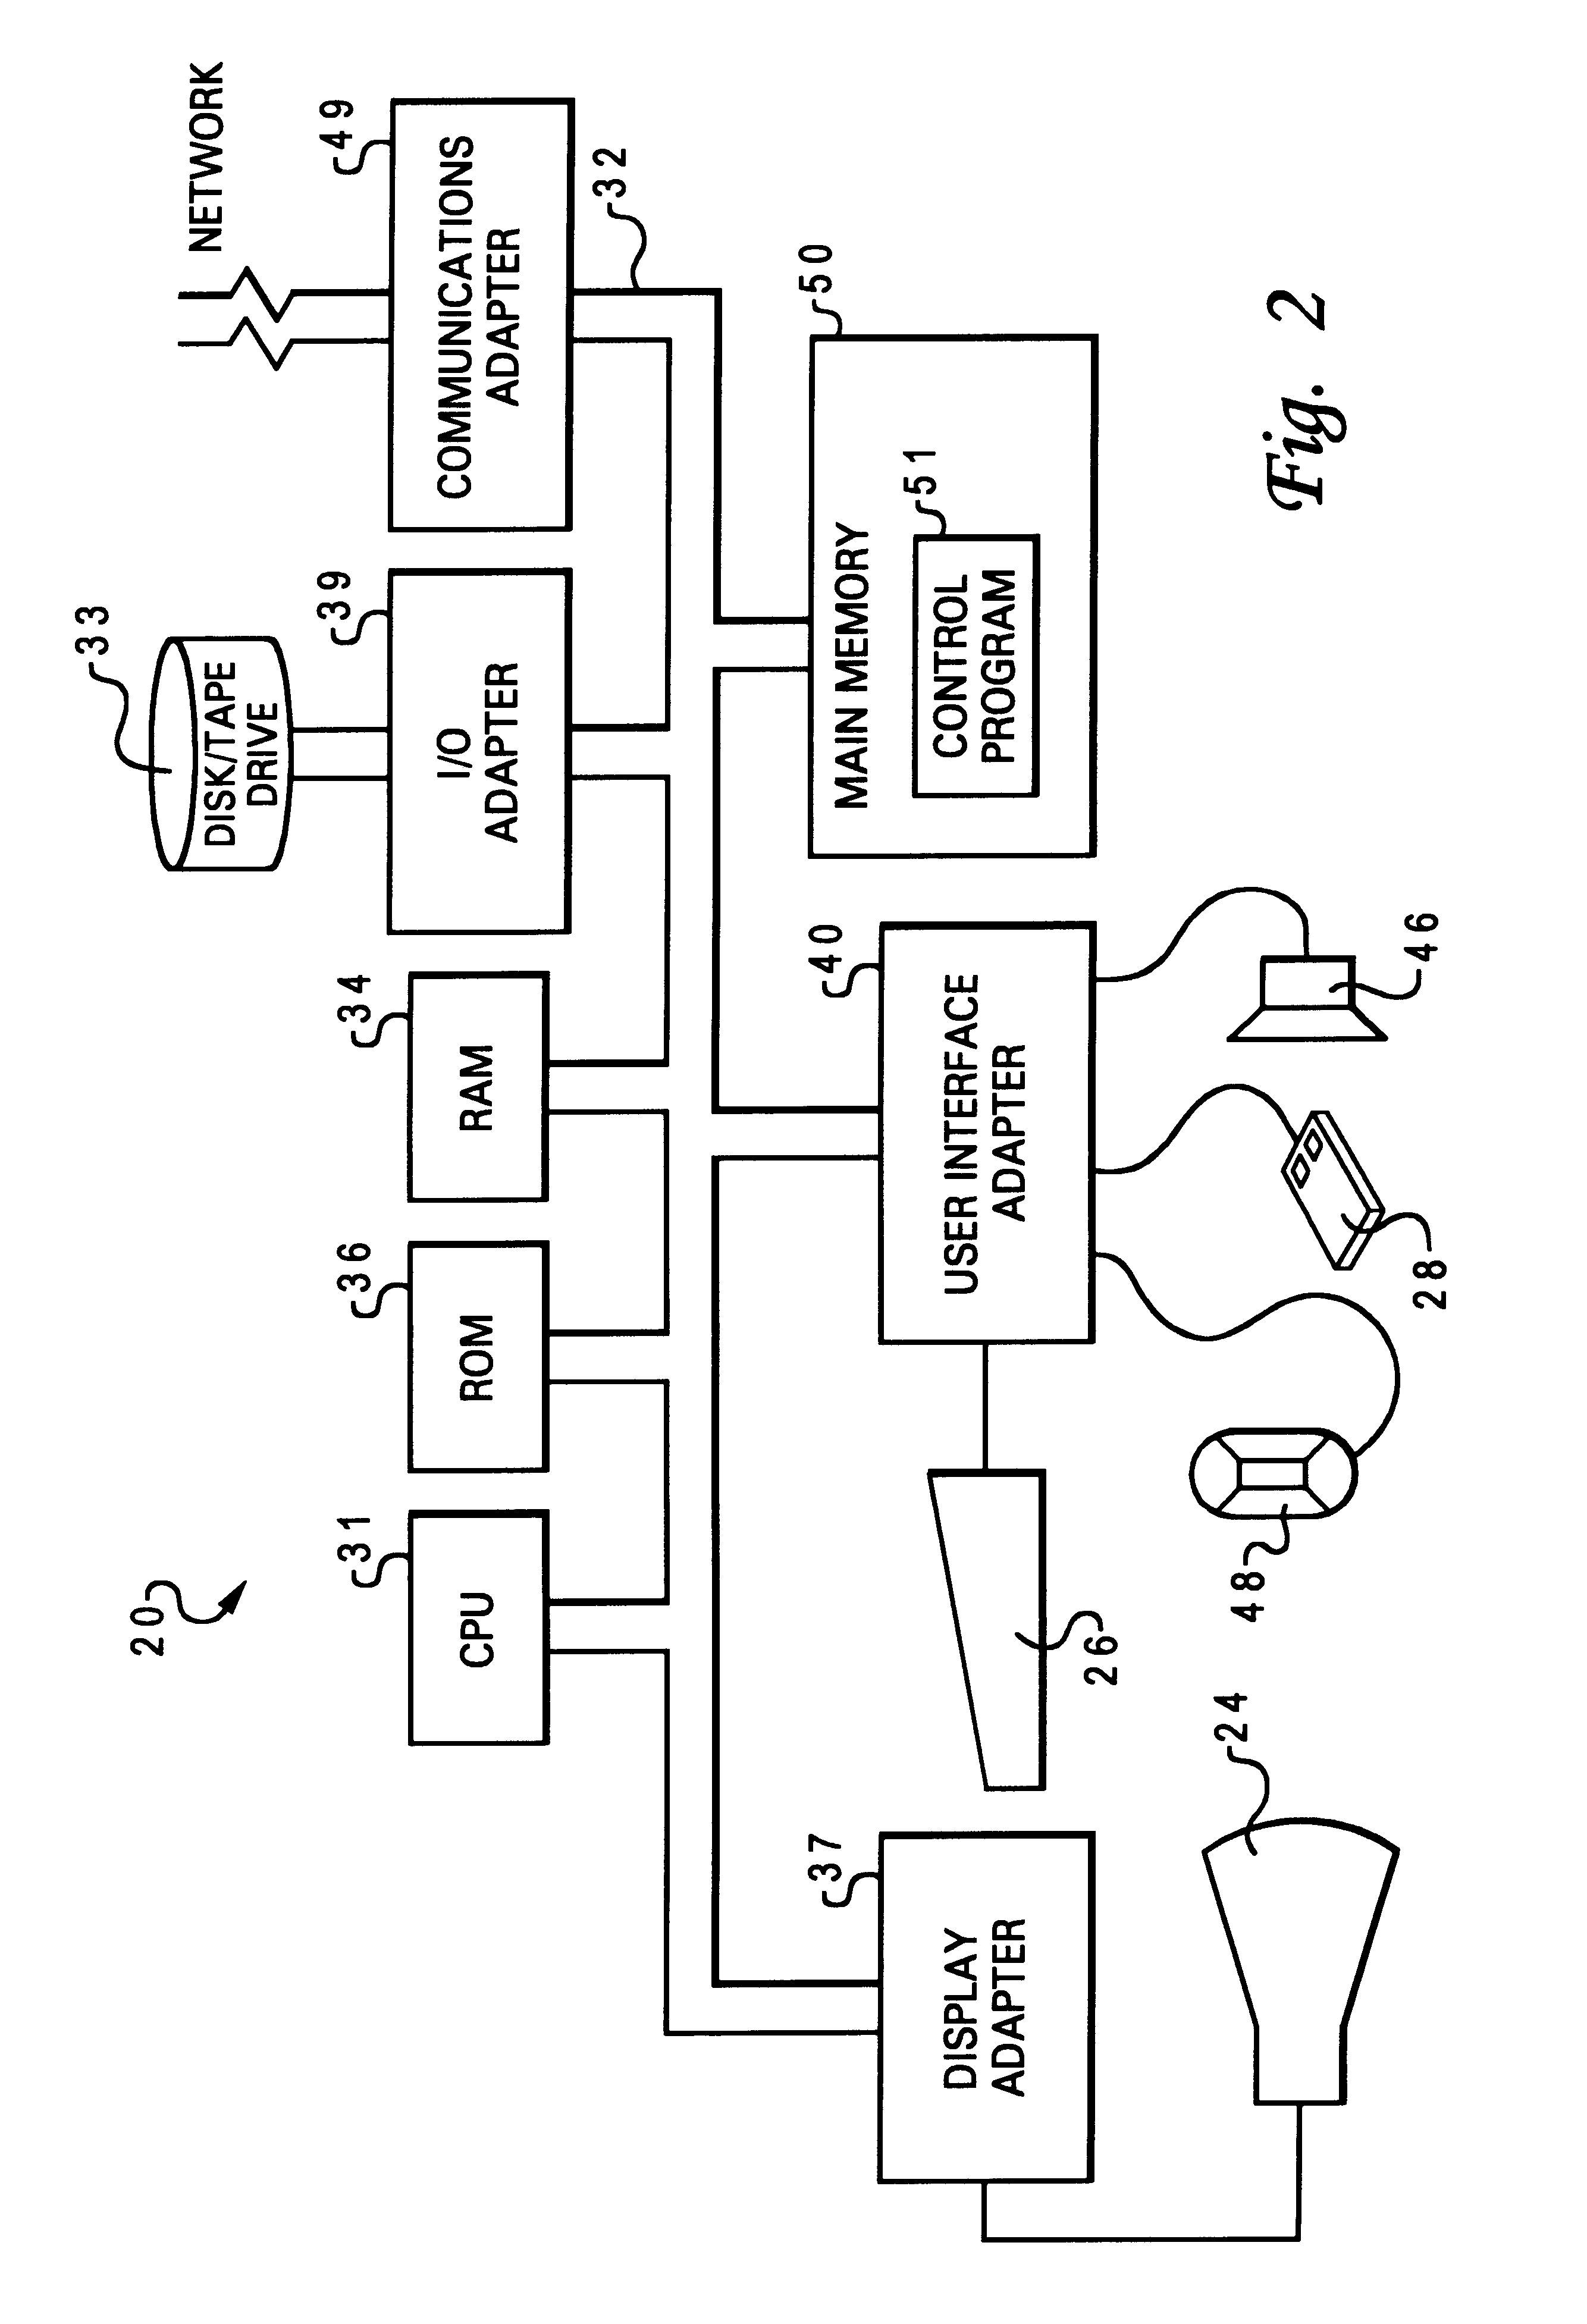 Apparatus in a computer system for pliant ergonomic pointing device